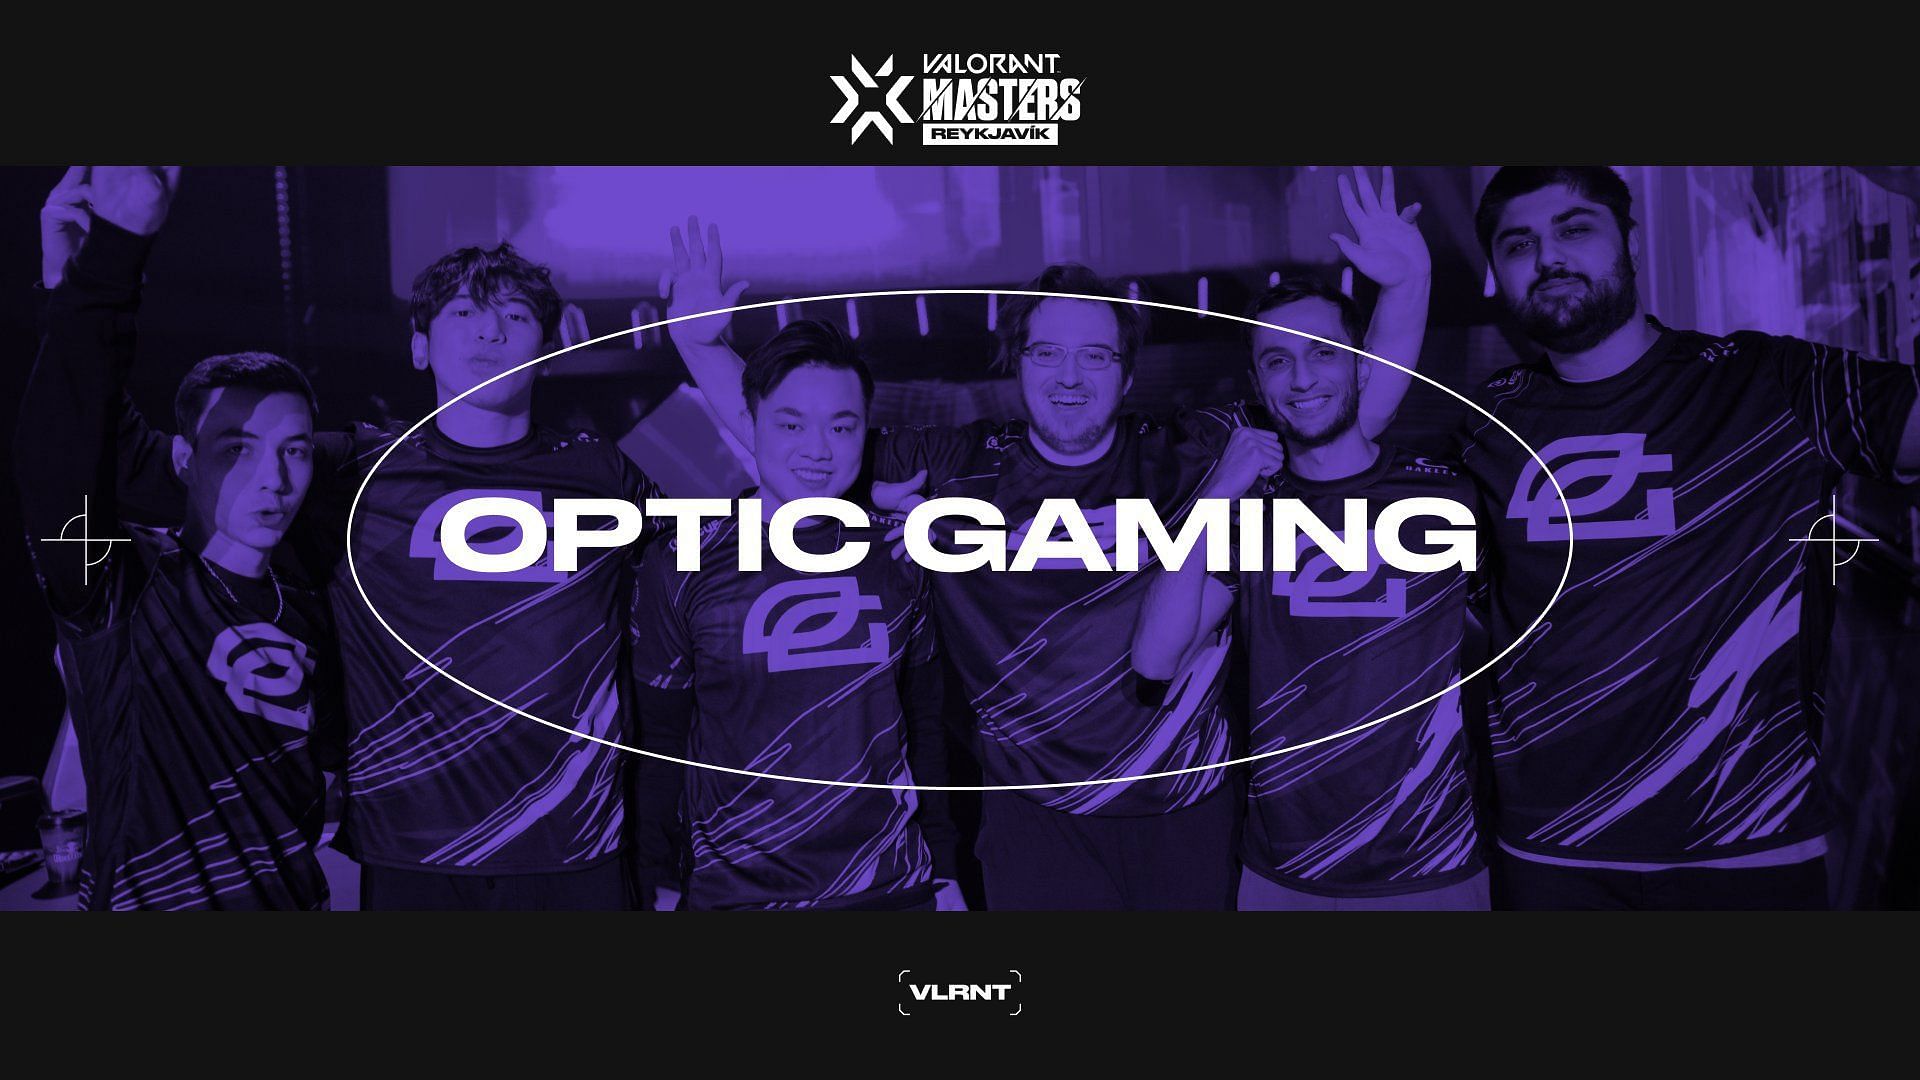 OpTic Gaming wins the Valorant Champions Tour (VCT) 2022 Stage 1 Masters Reykjavik after defeating LOUD in Grand Finals (Image via ValorantEsports/Twitter)